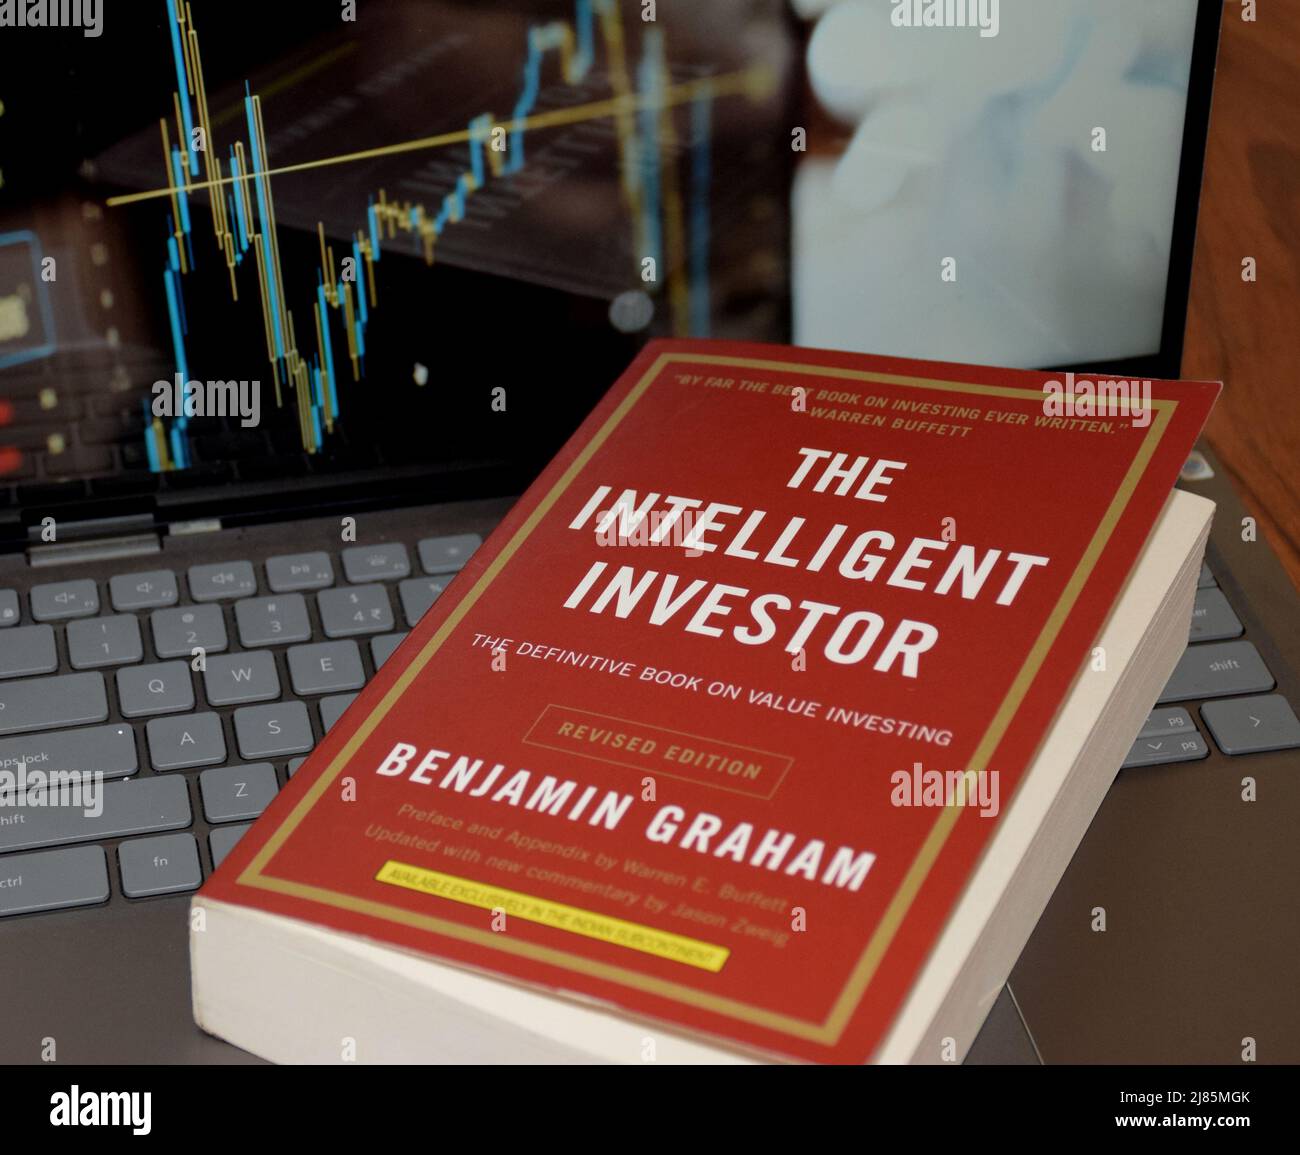 The Intelligent Investor is the best book on stock market